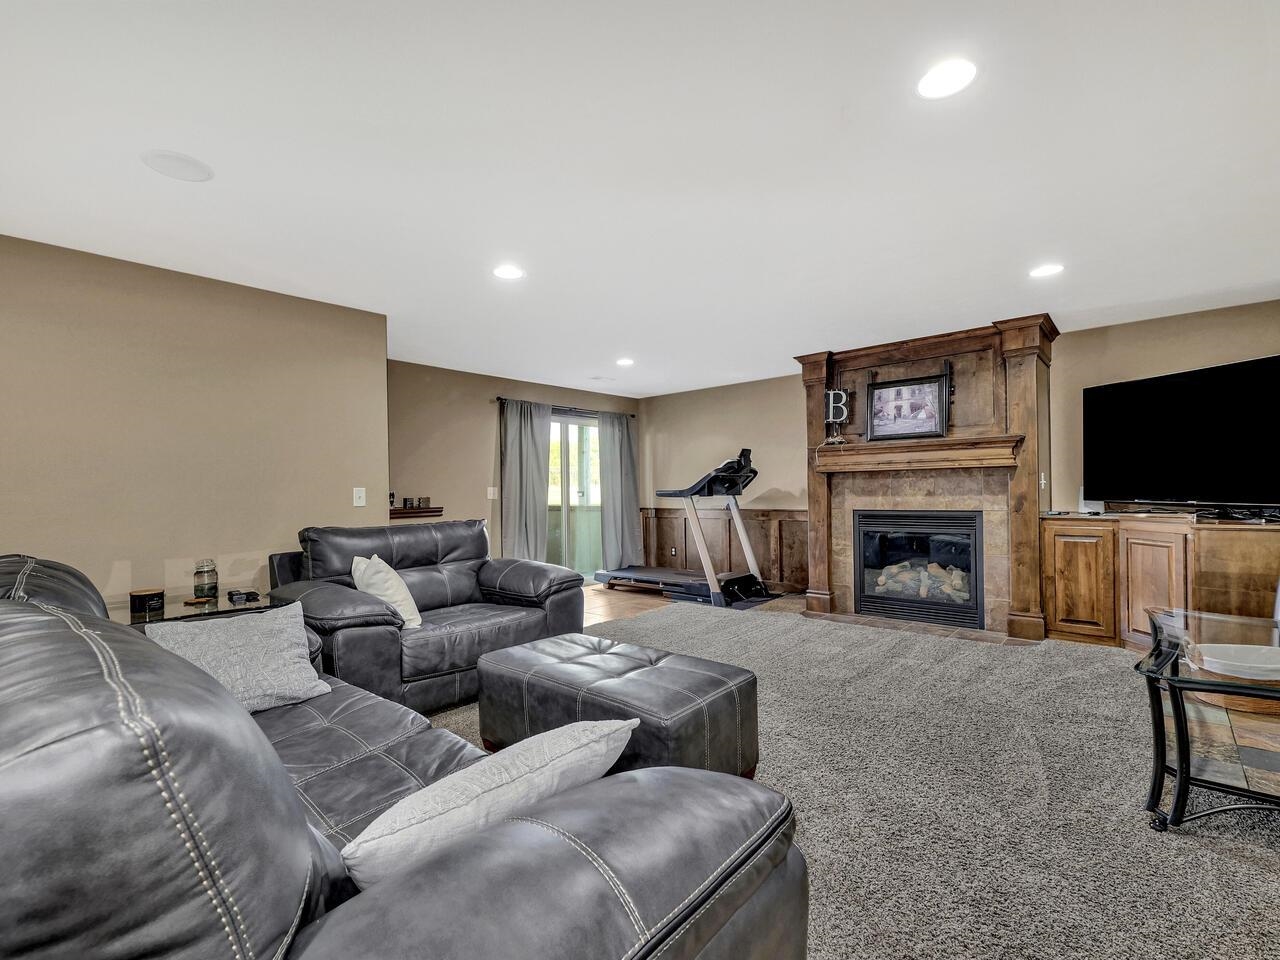 For Sale: 4744 N Emerald Ct, Maize KS